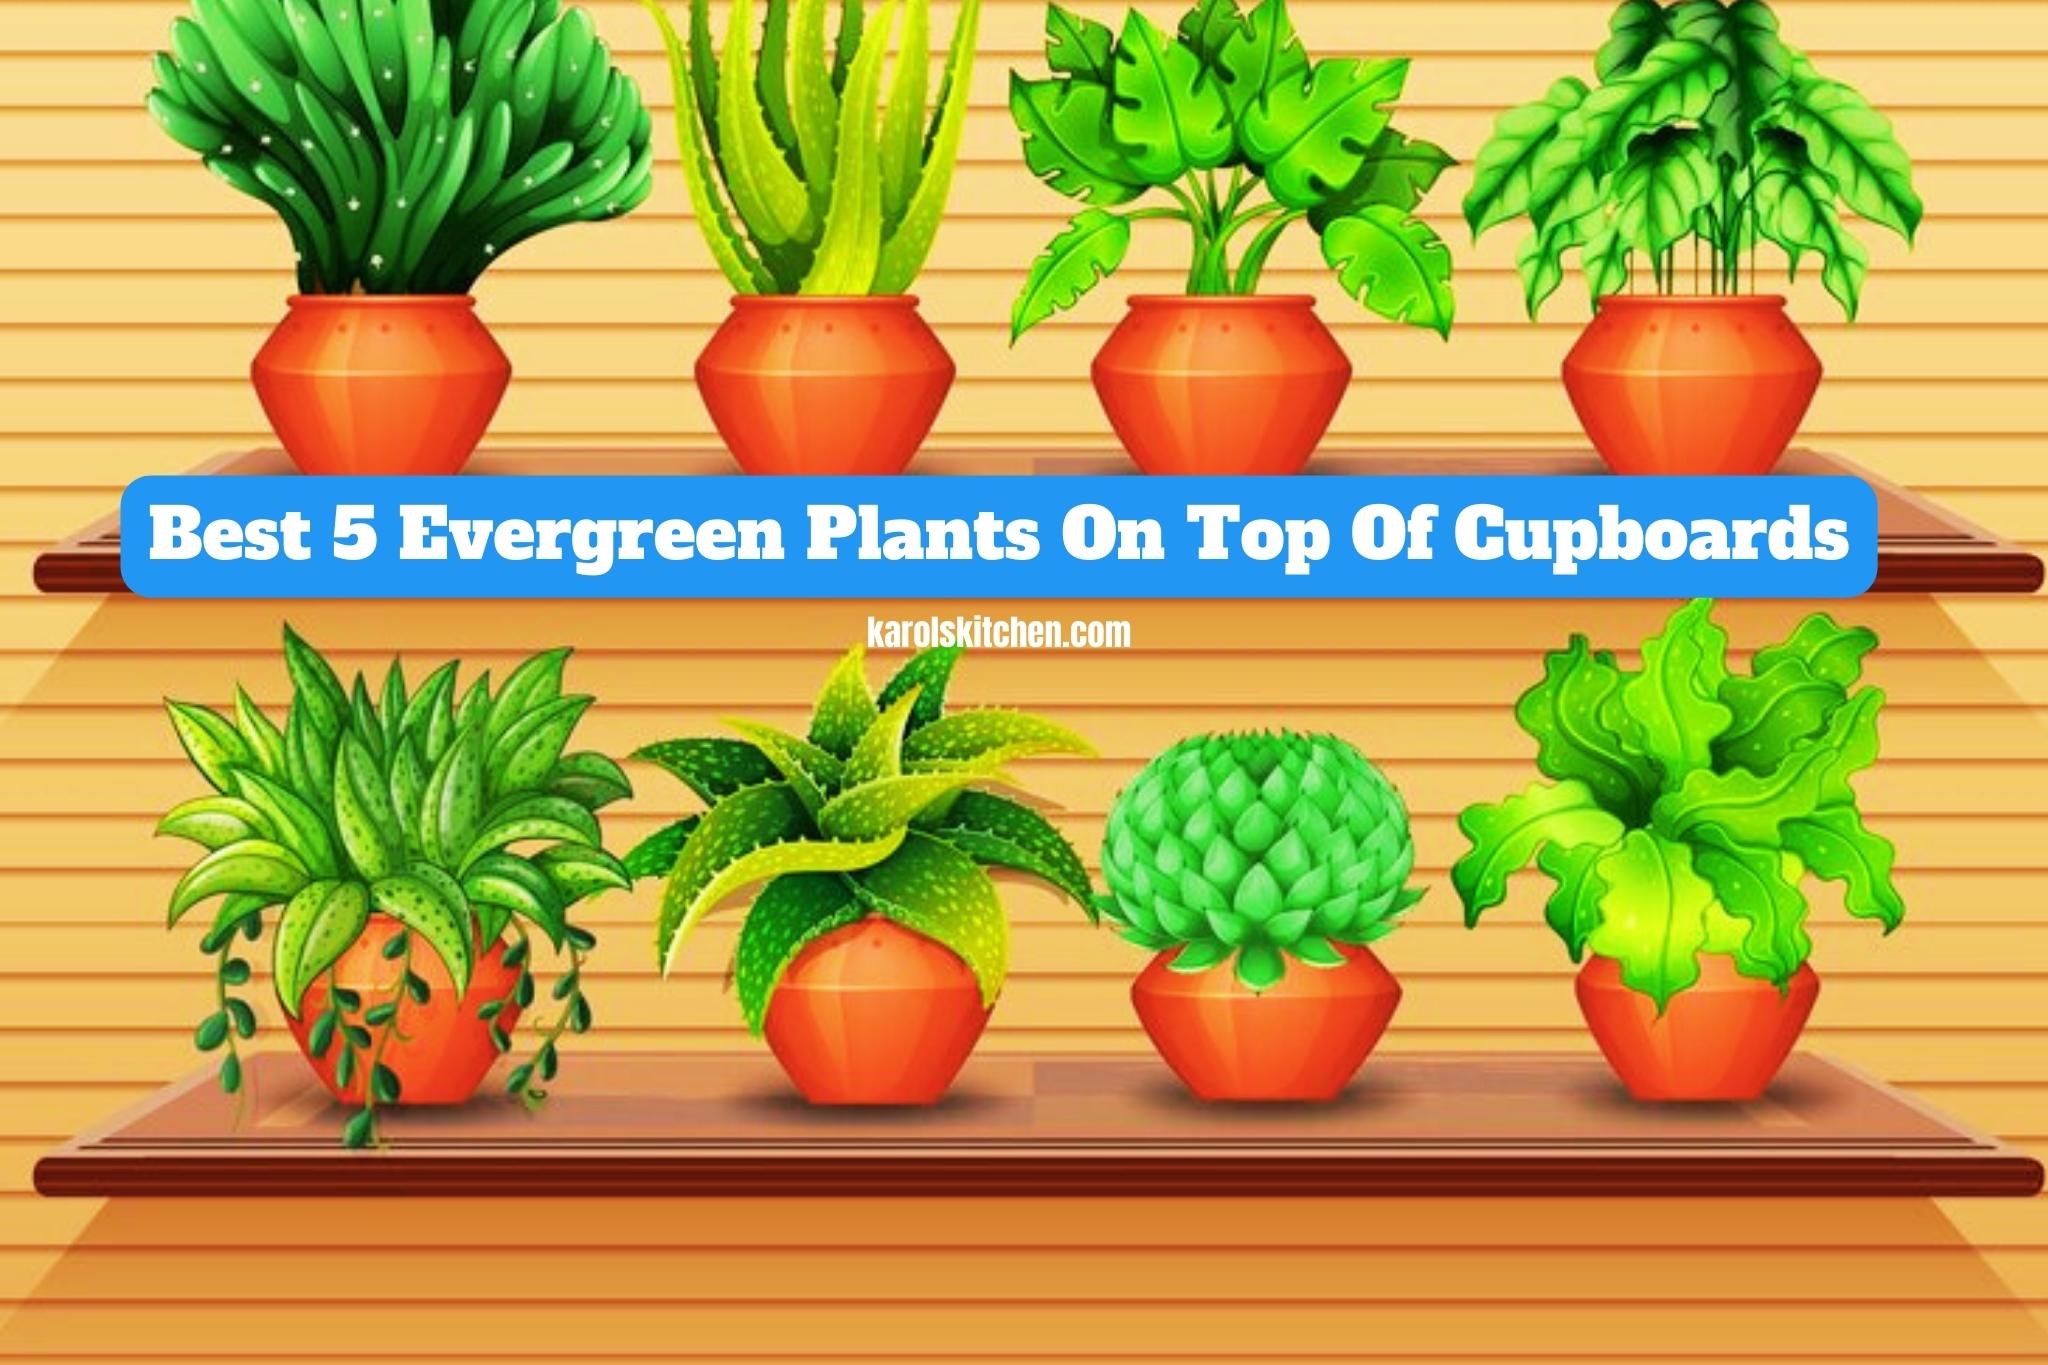 Evergreen Plants On Top Of Cupboards